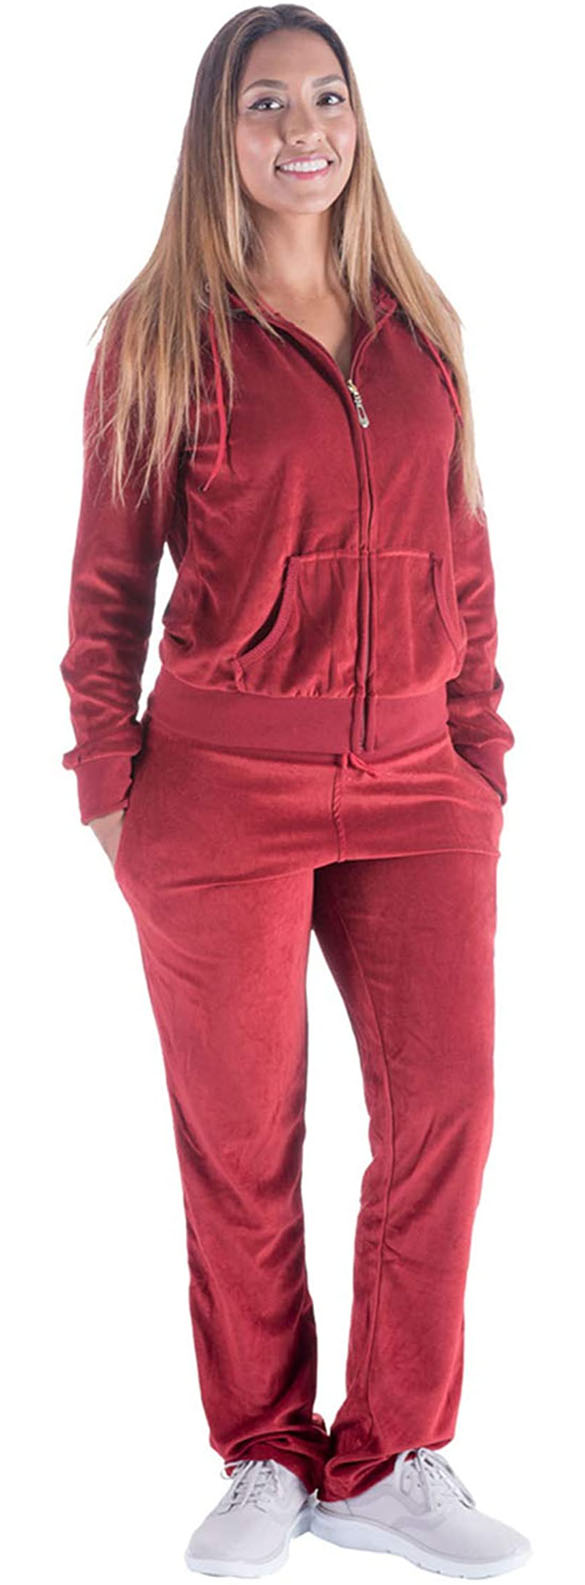 product2 - 12 Best Stylish Sweatsuits for Women in 2021